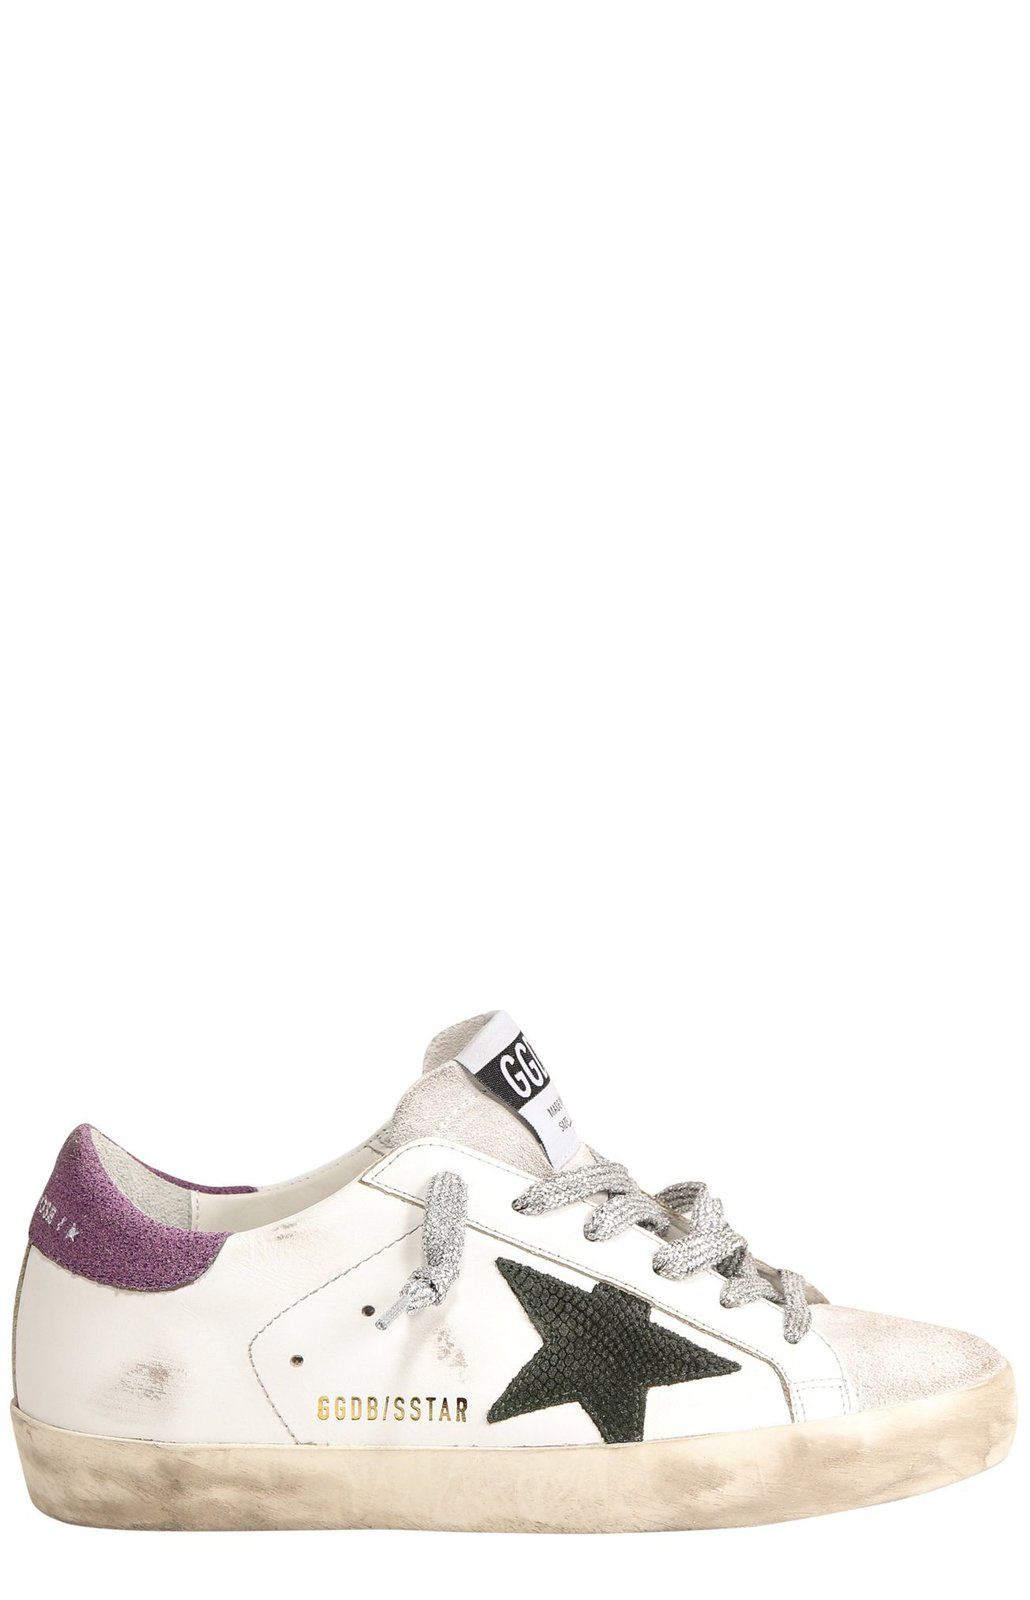 Golden Goose Deluxe Brand Super-Star Lace-Up Sneakers | Cettire Global